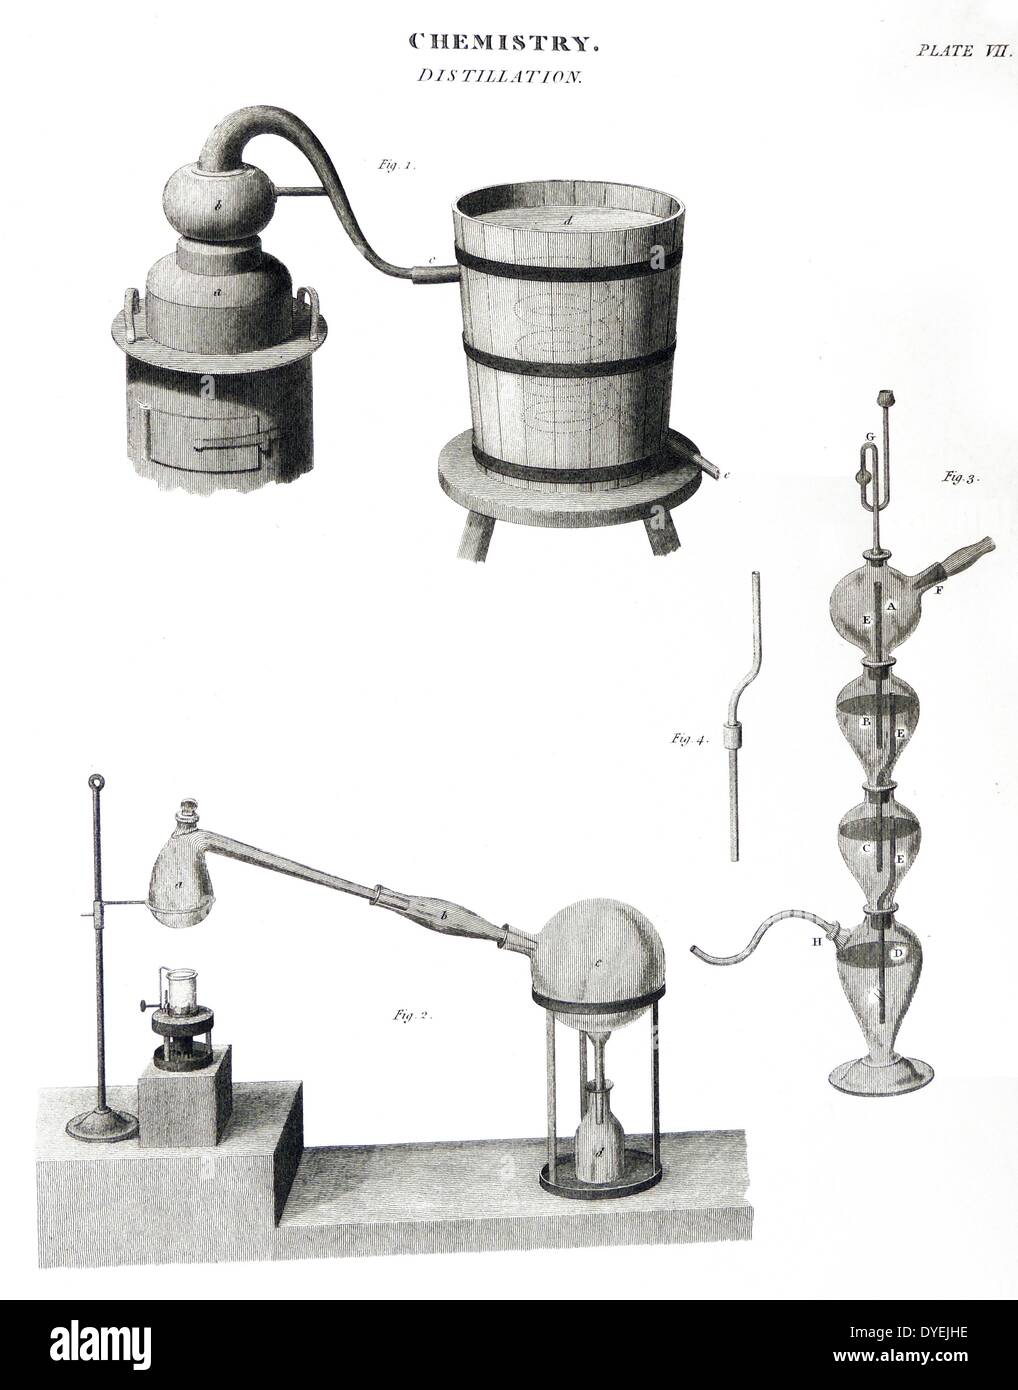 Methods of condensing the producing of distillation. Fig. 1 shows the beak of an alembic attached to a worm coiling through a tub of cold water. Engraving, London, 1810. Stock Photo